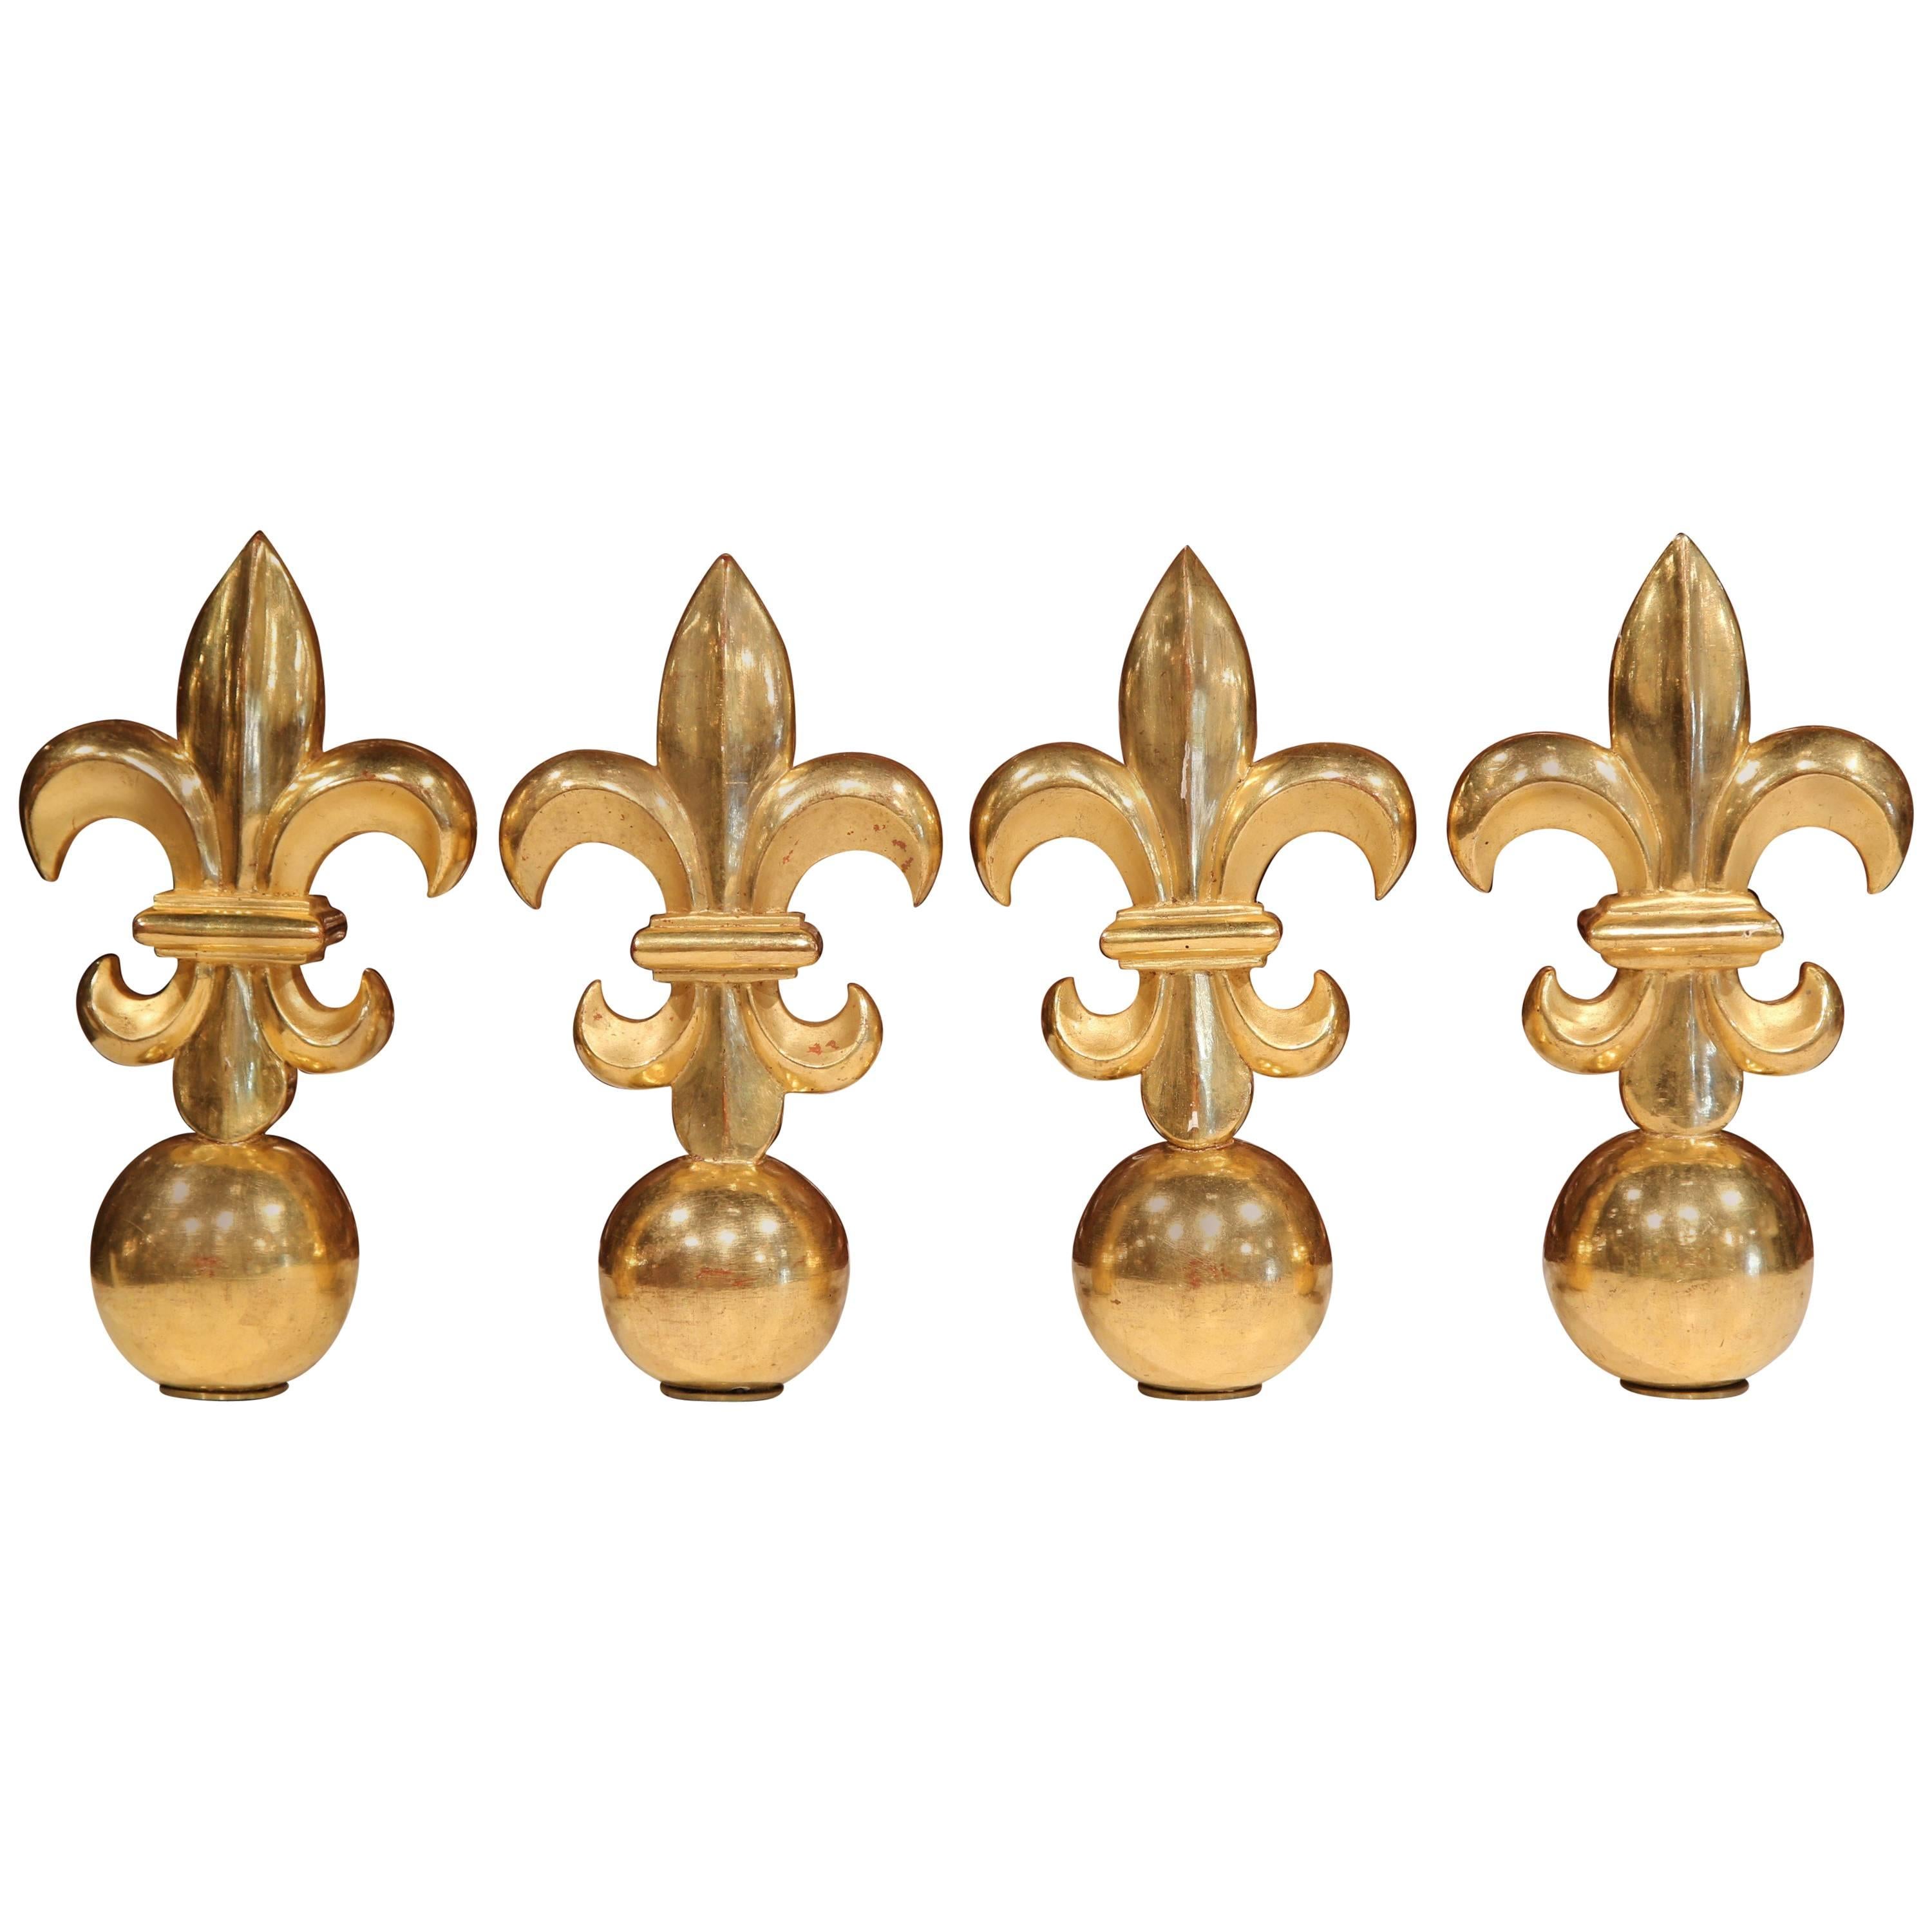 Early 20th Century French Set of Four Carved Giltwood Decorative Fleur-de-Lys